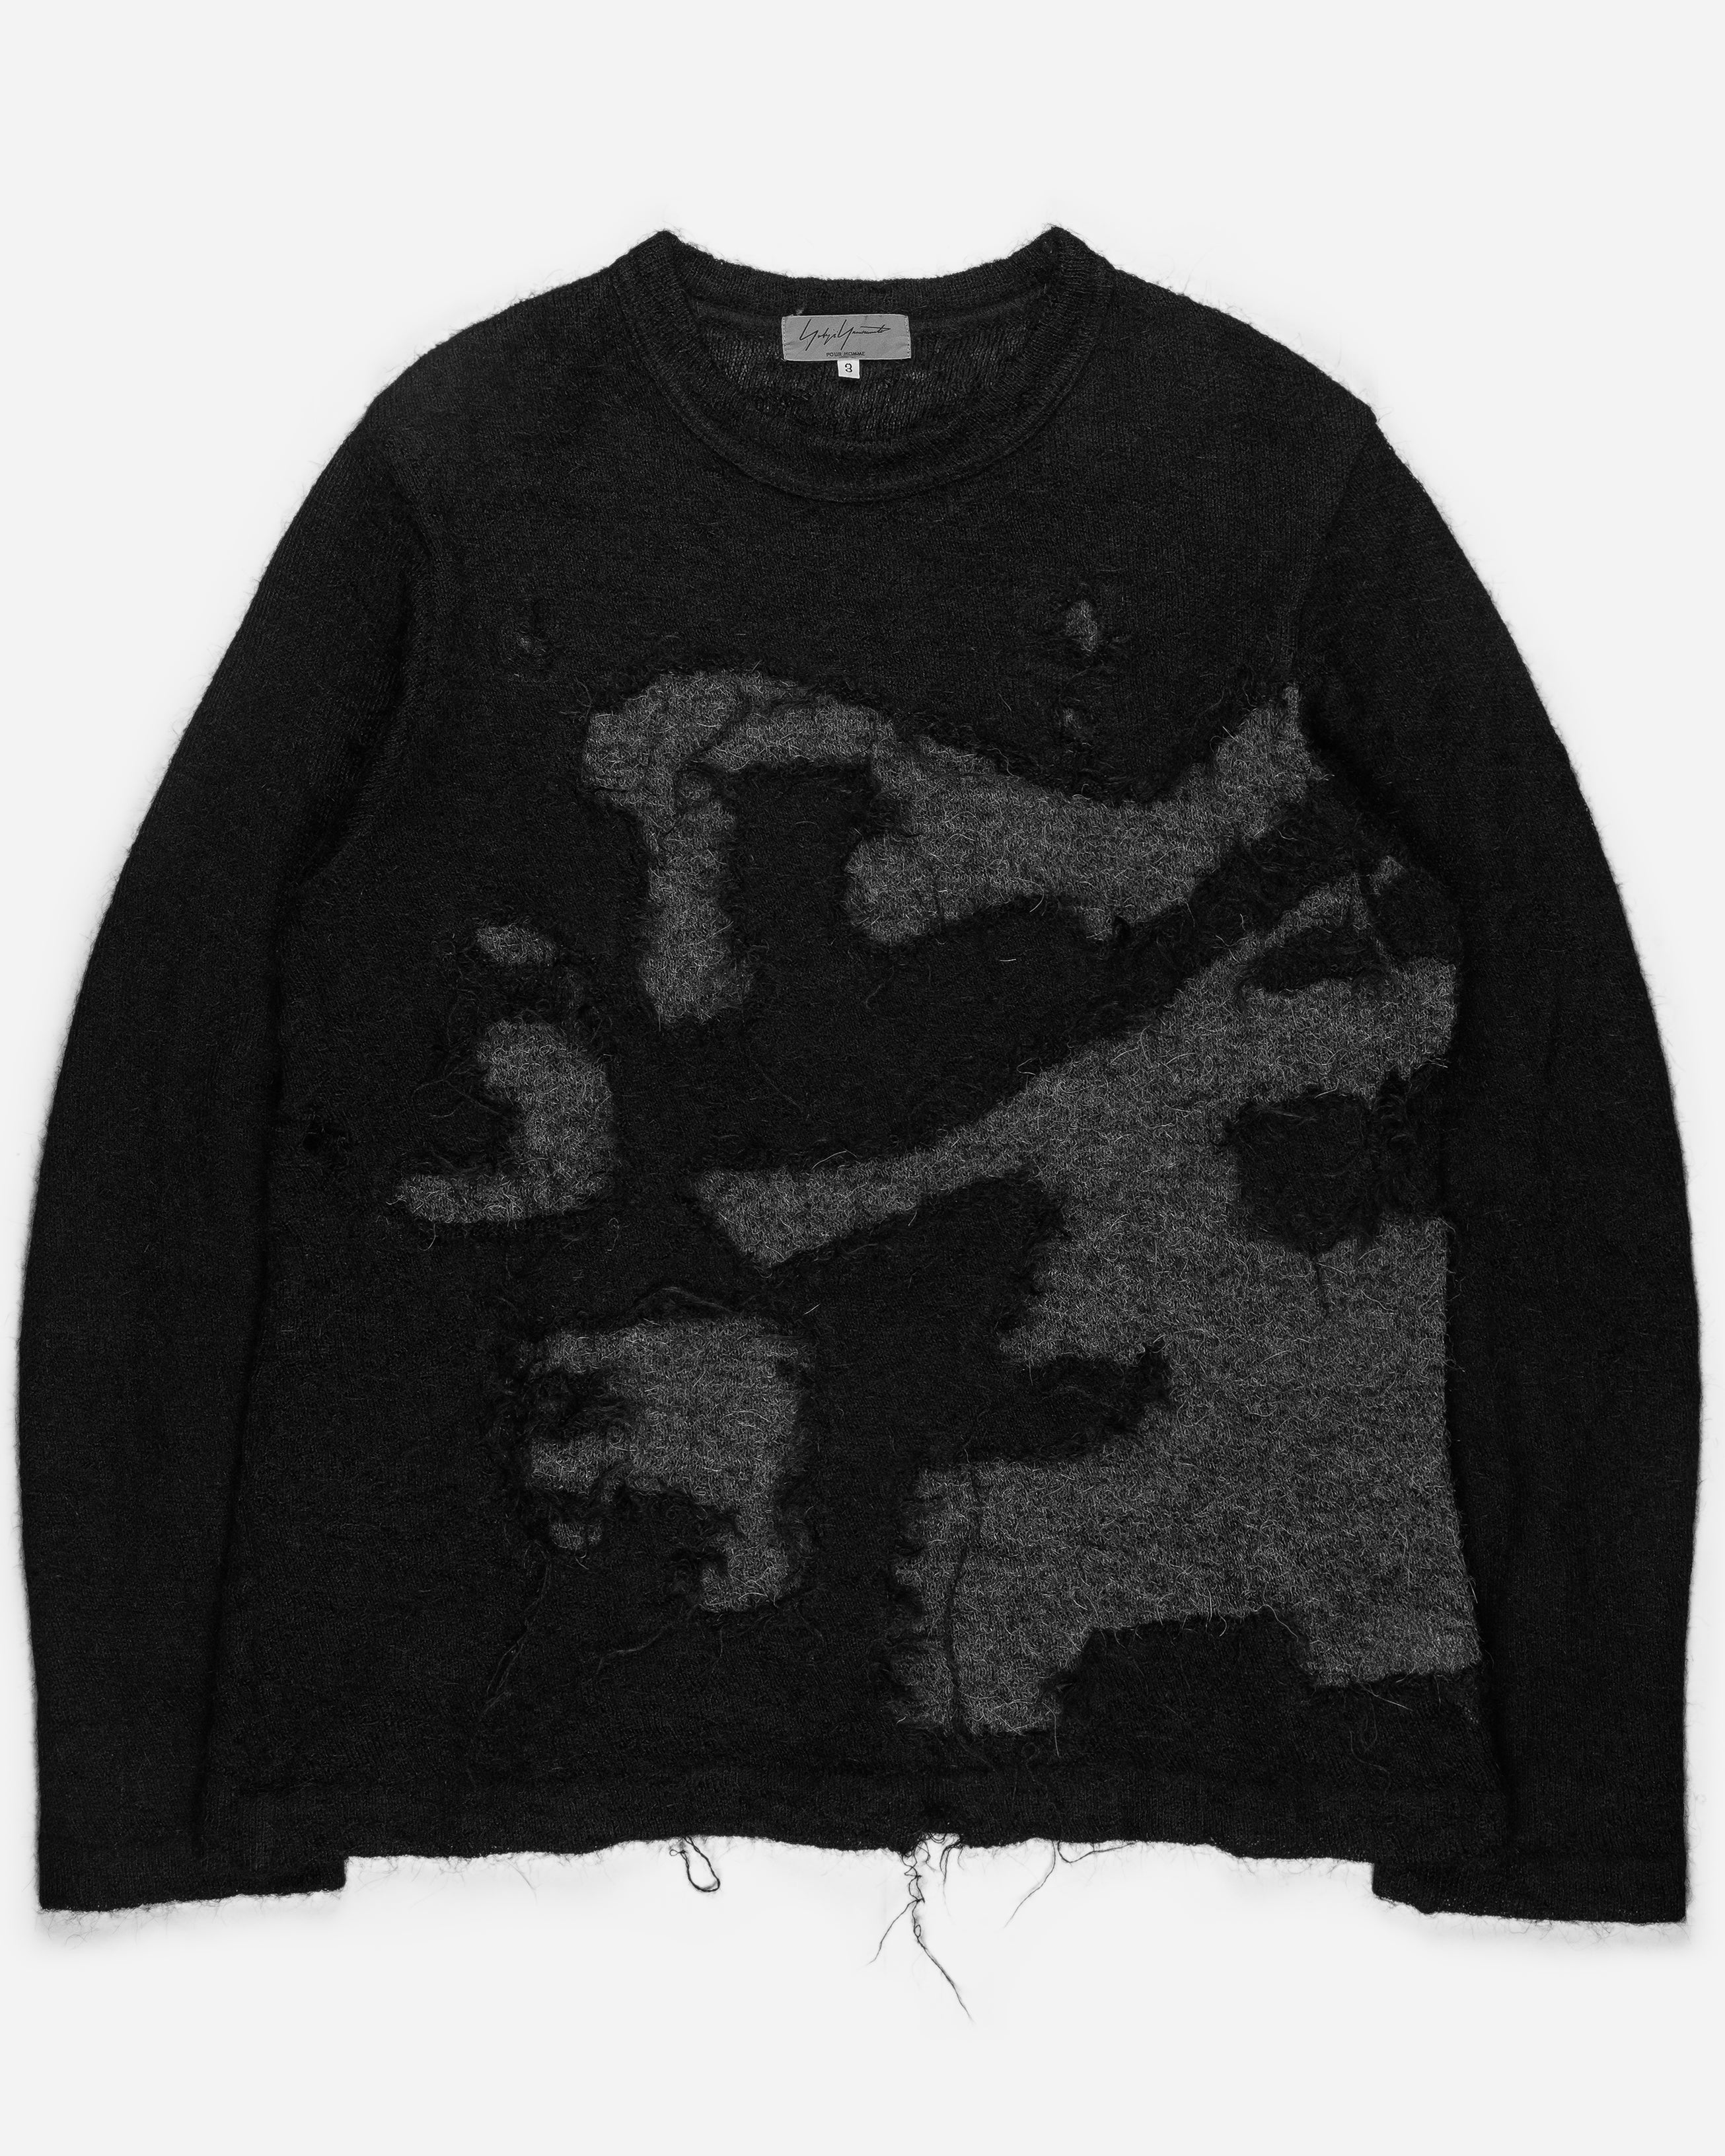 Yohji Yamamoto Pour Homme Abstract Distressed Alpaca Knitted